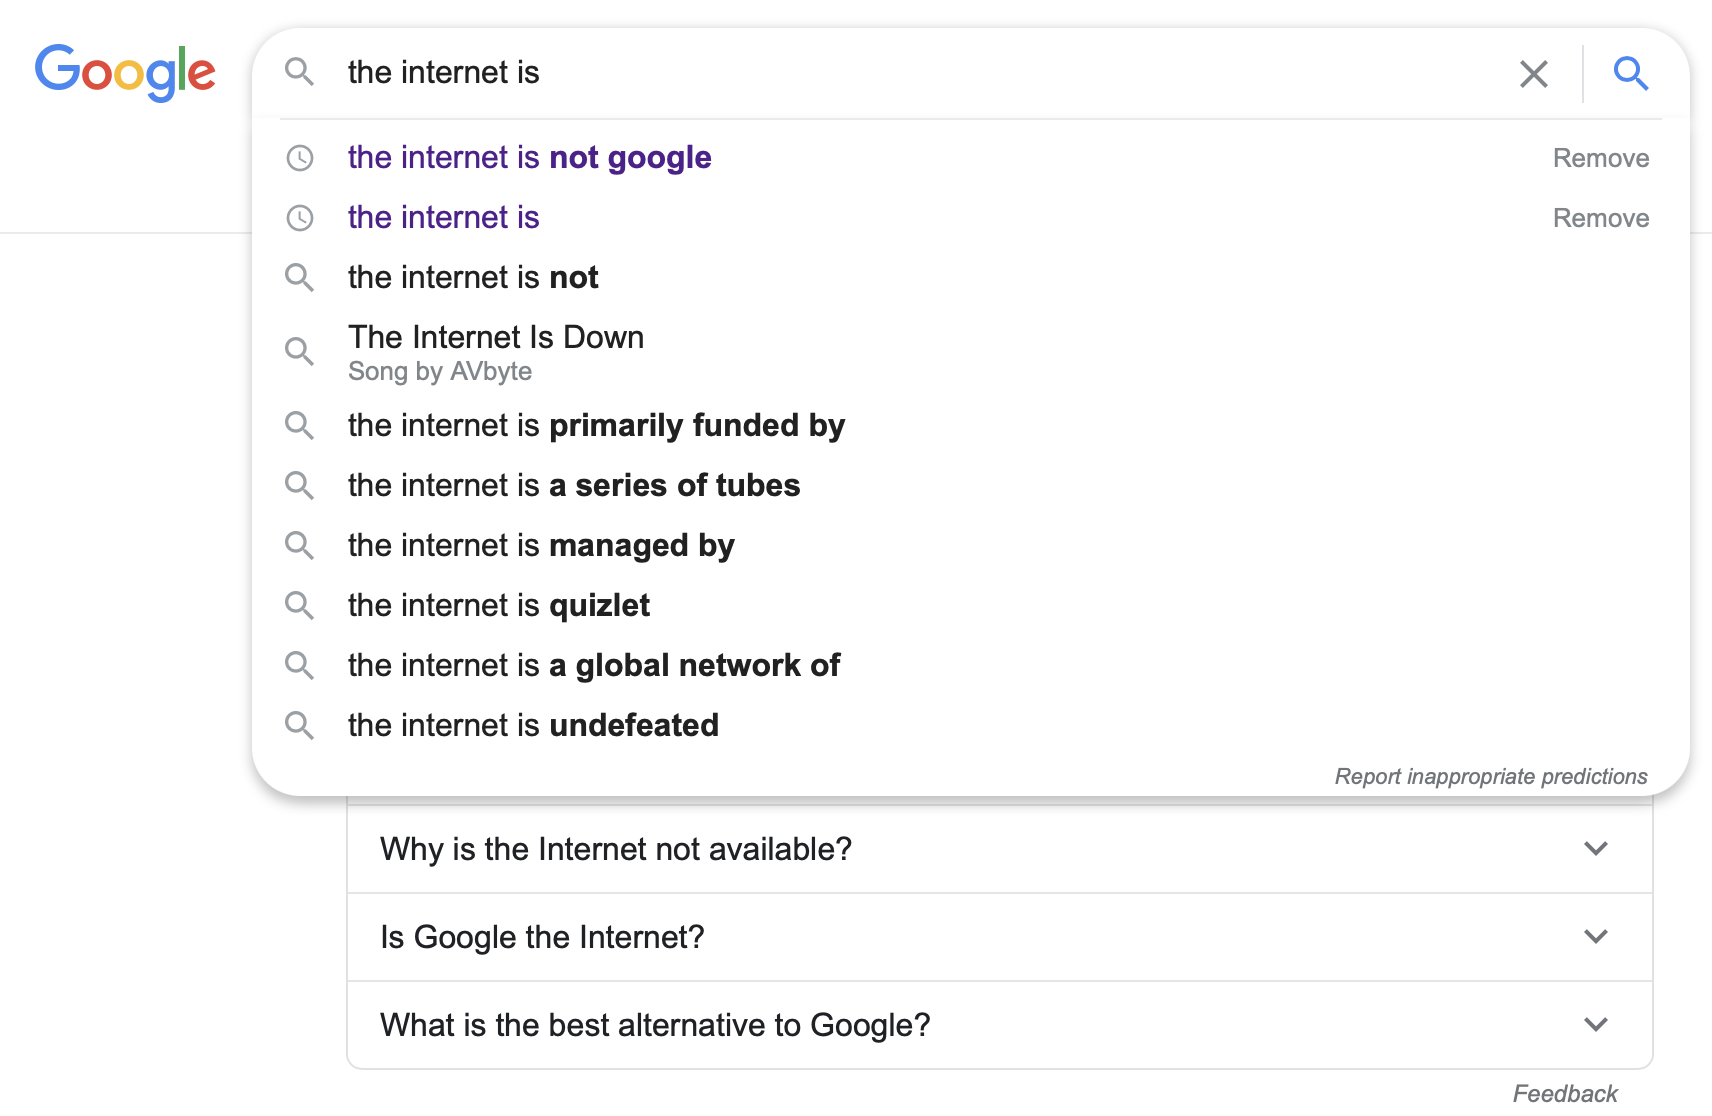 Google
          the internet is
          the internet is not google
          the internet is
          the internet is not

          The Internet Is Down
            Song by AVbyte

          the internet is primarily funded by
          the internet is a series of tubes
          the internet is managed by

          the internet is quizlet

          the internet is a global network of

          the internet is undefeated

          Why is the Internet not available?
          Is Google the Internet?

          What is the best alternative to Google?

          Remove

          Remove

          Report inappropriate predictions
          Feedback